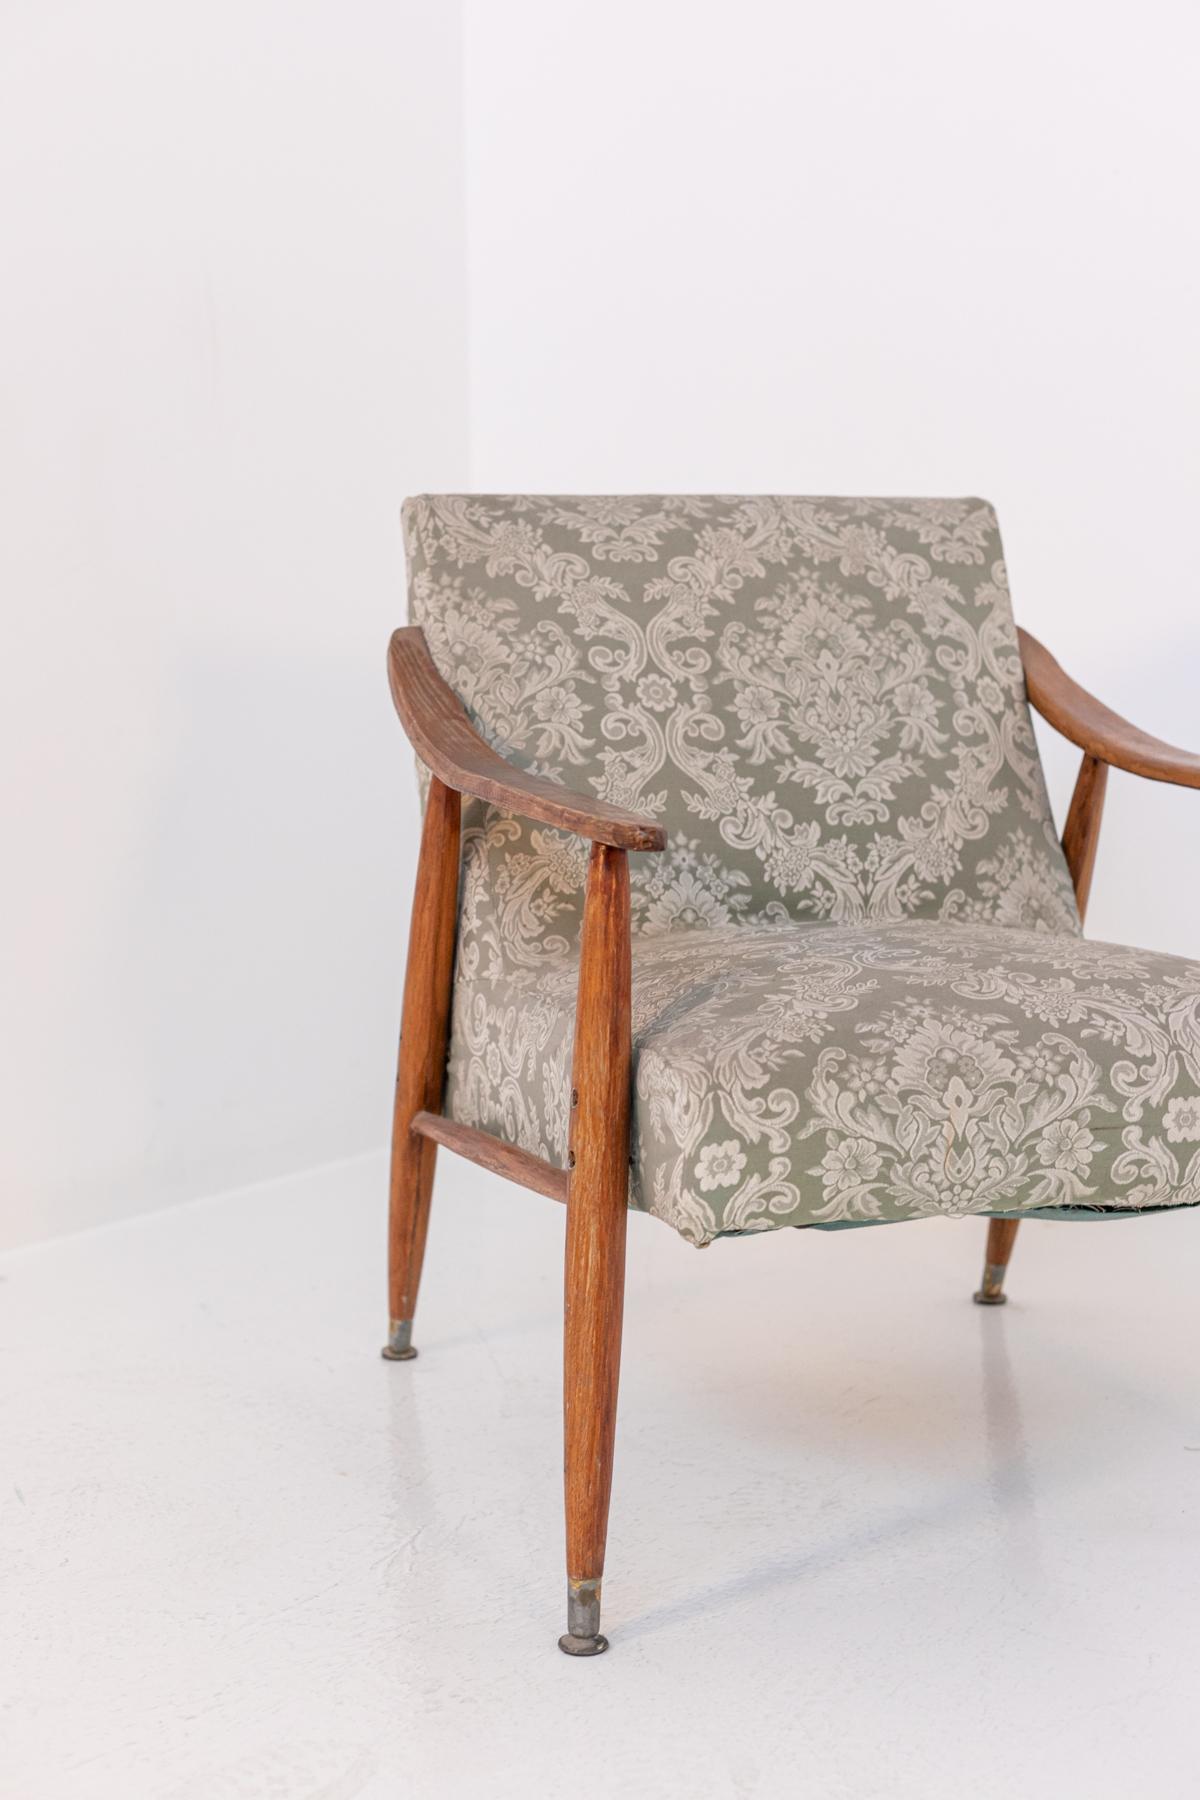 Nordic Armchair in Wood and Damask Fabric In Good Condition For Sale In Milano, IT